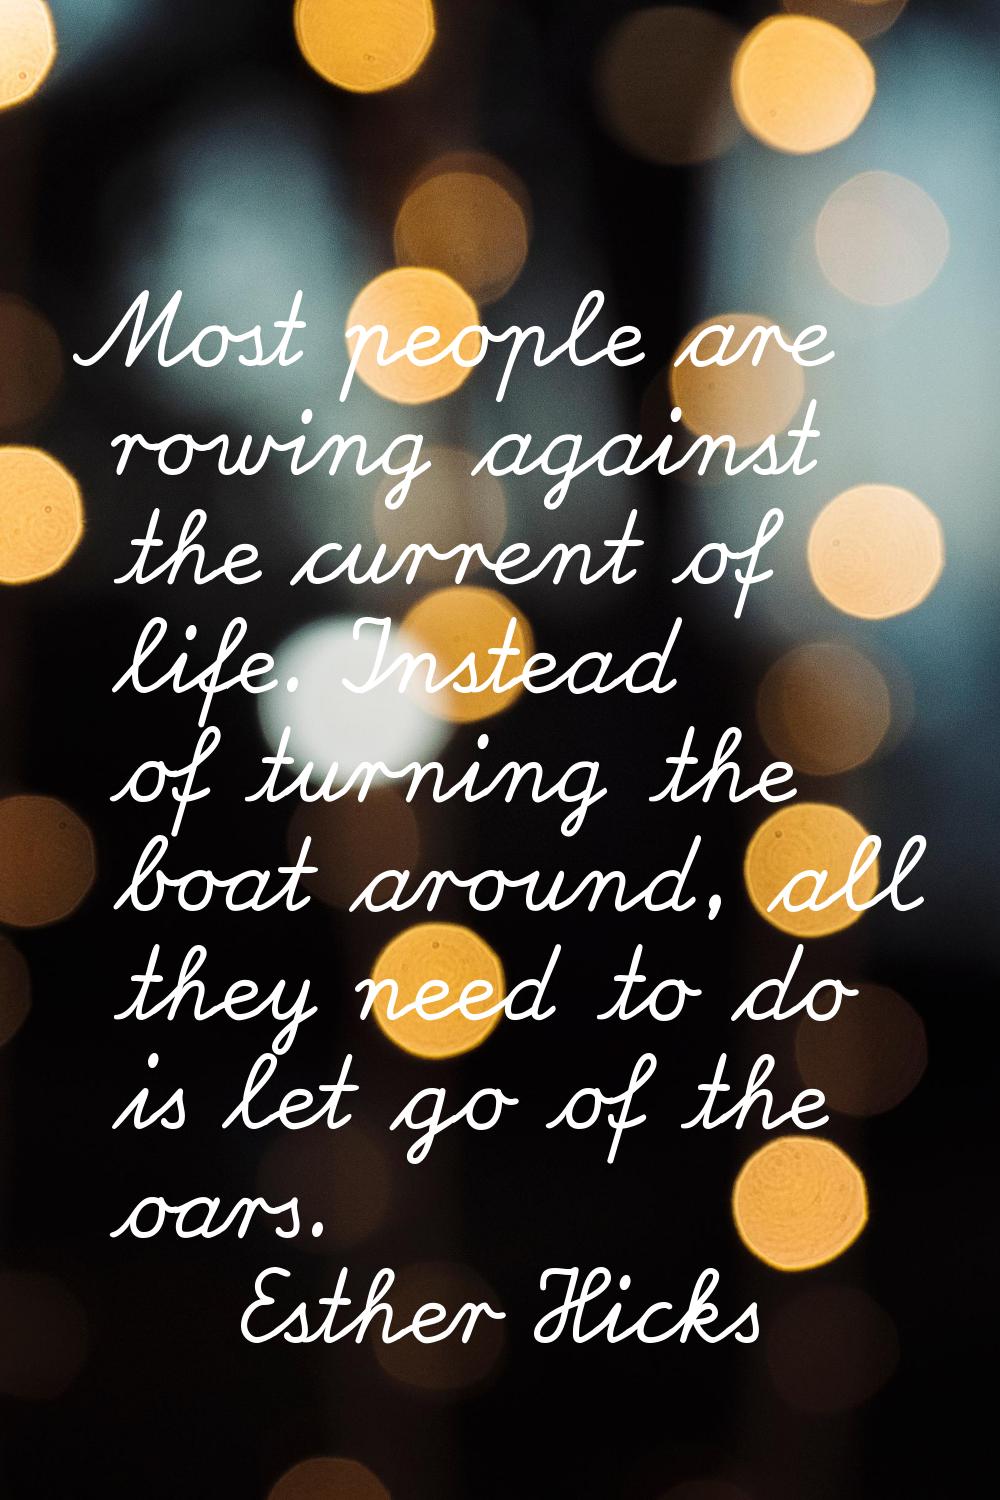 Most people are rowing against the current of life. Instead of turning the boat around, all they ne